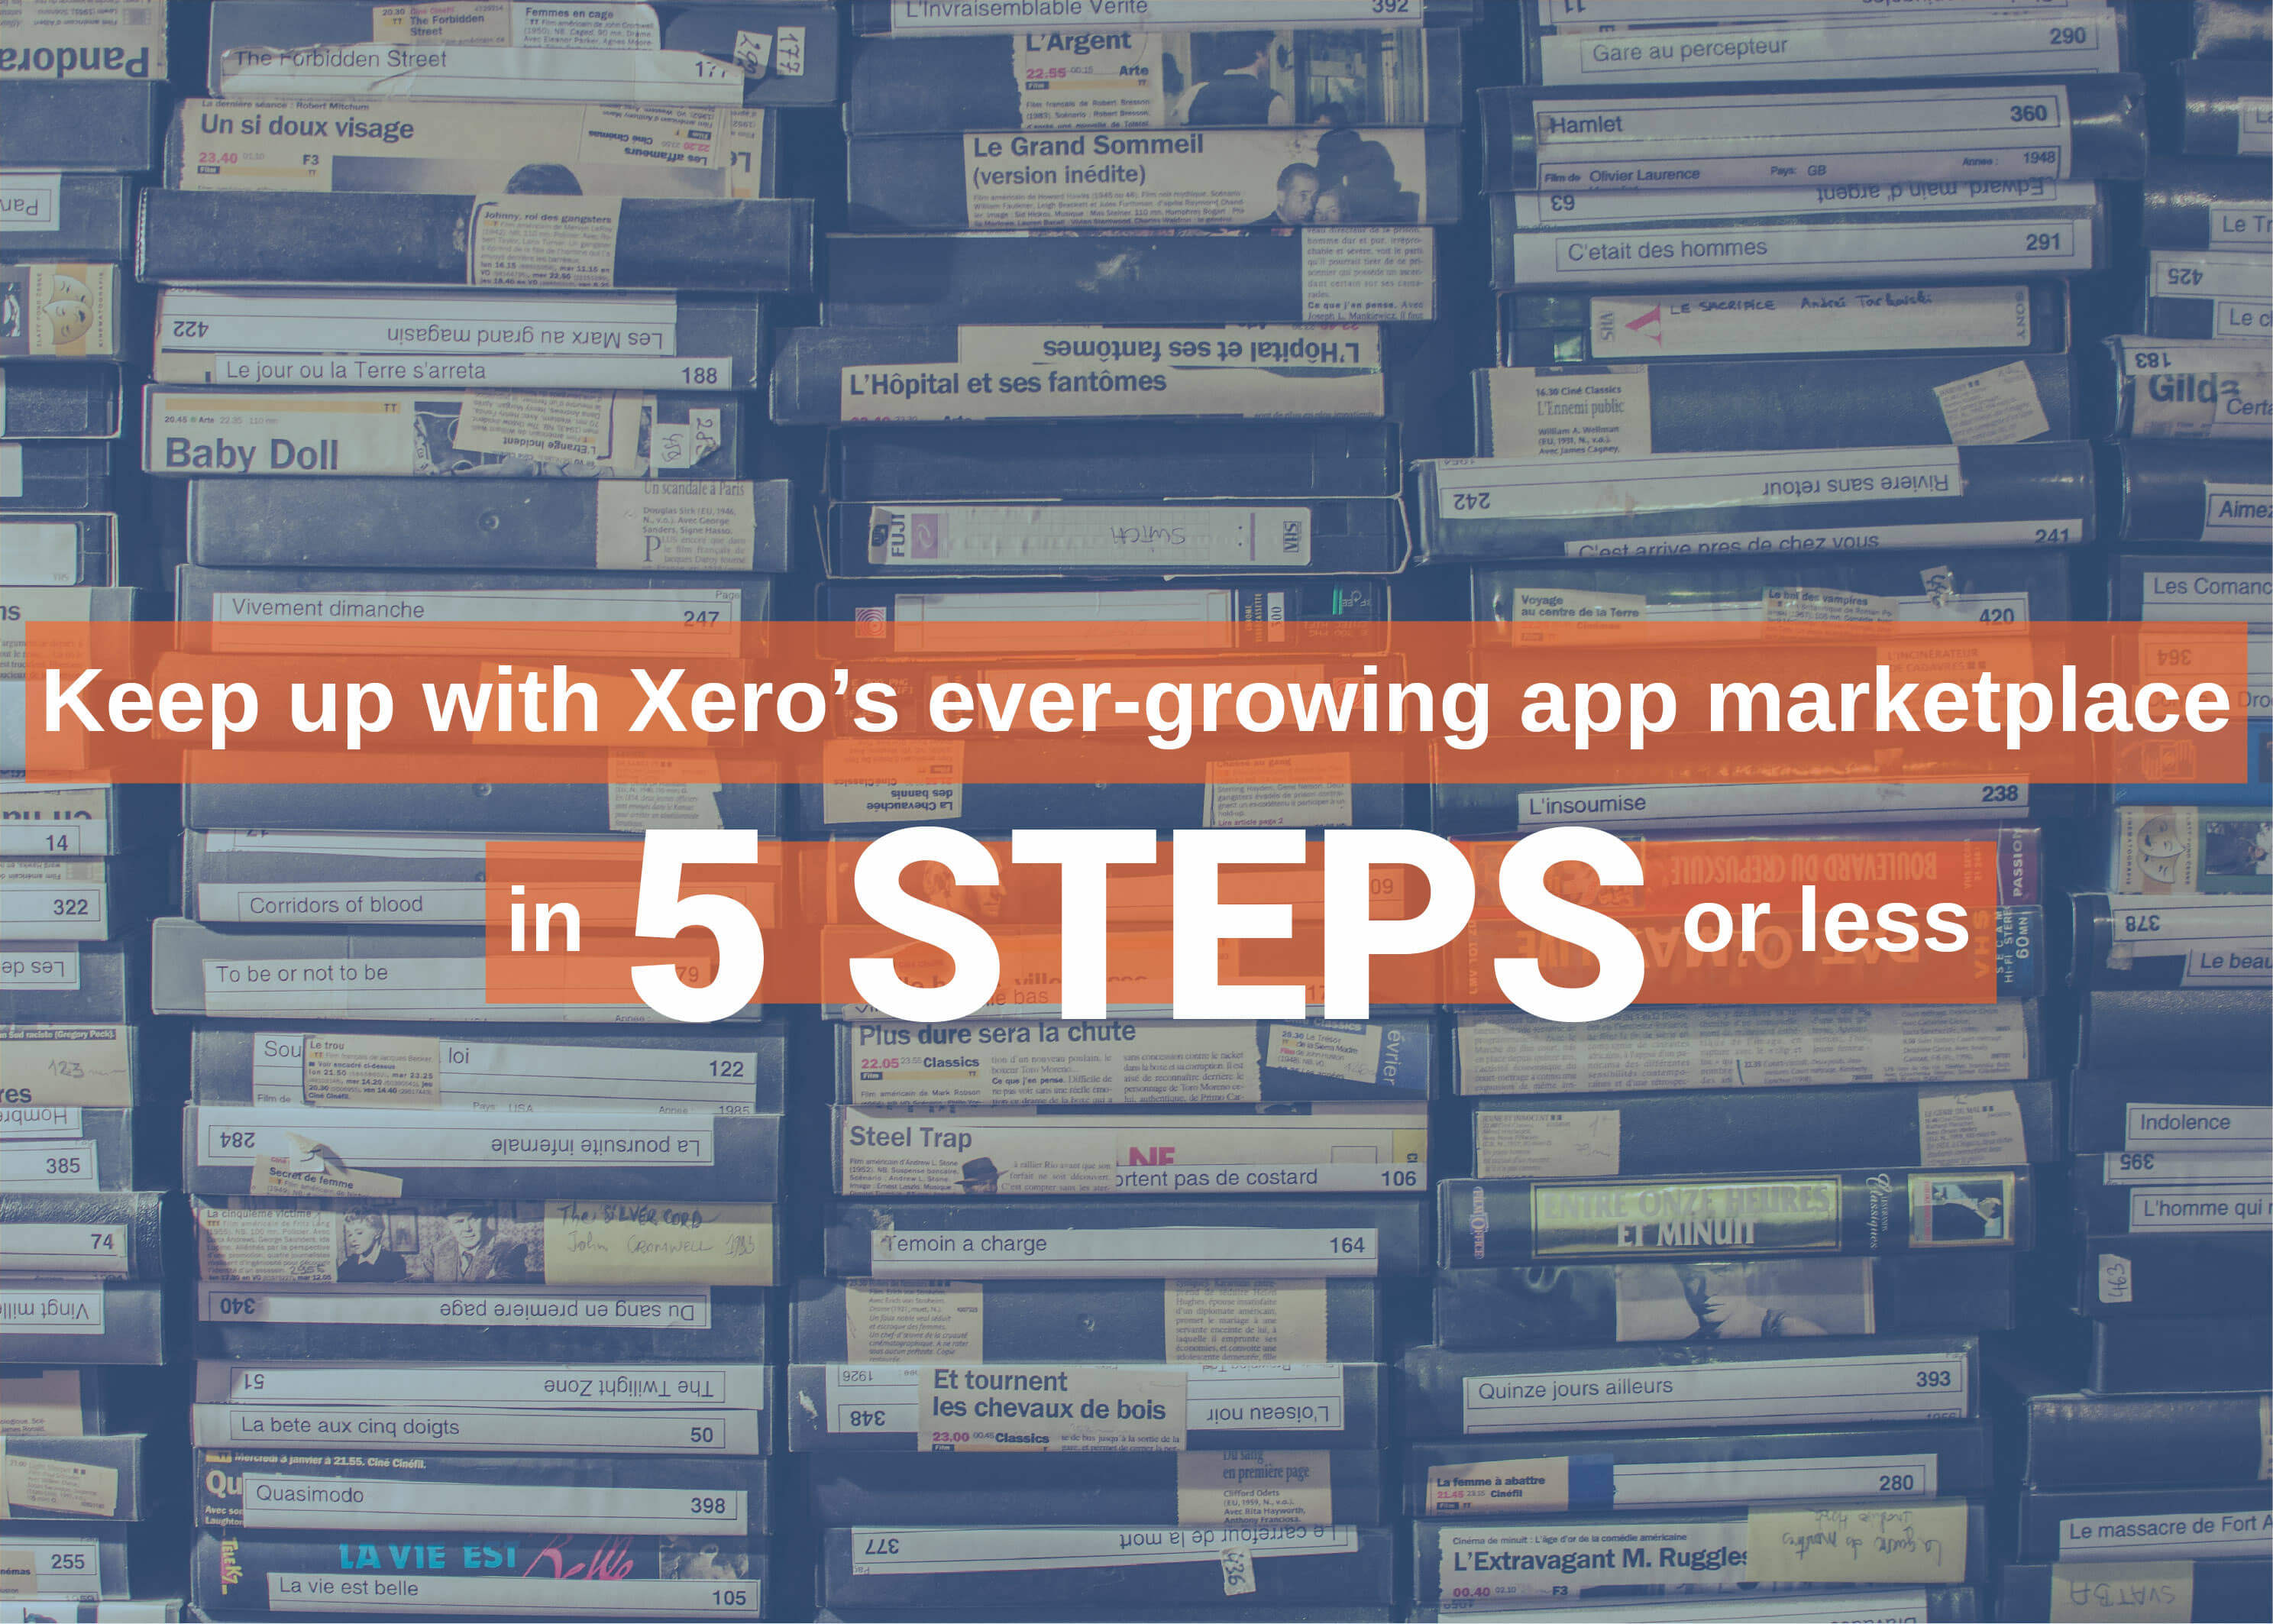 Keep up with Xero's ever-growing app marketplace in 5 steps or less